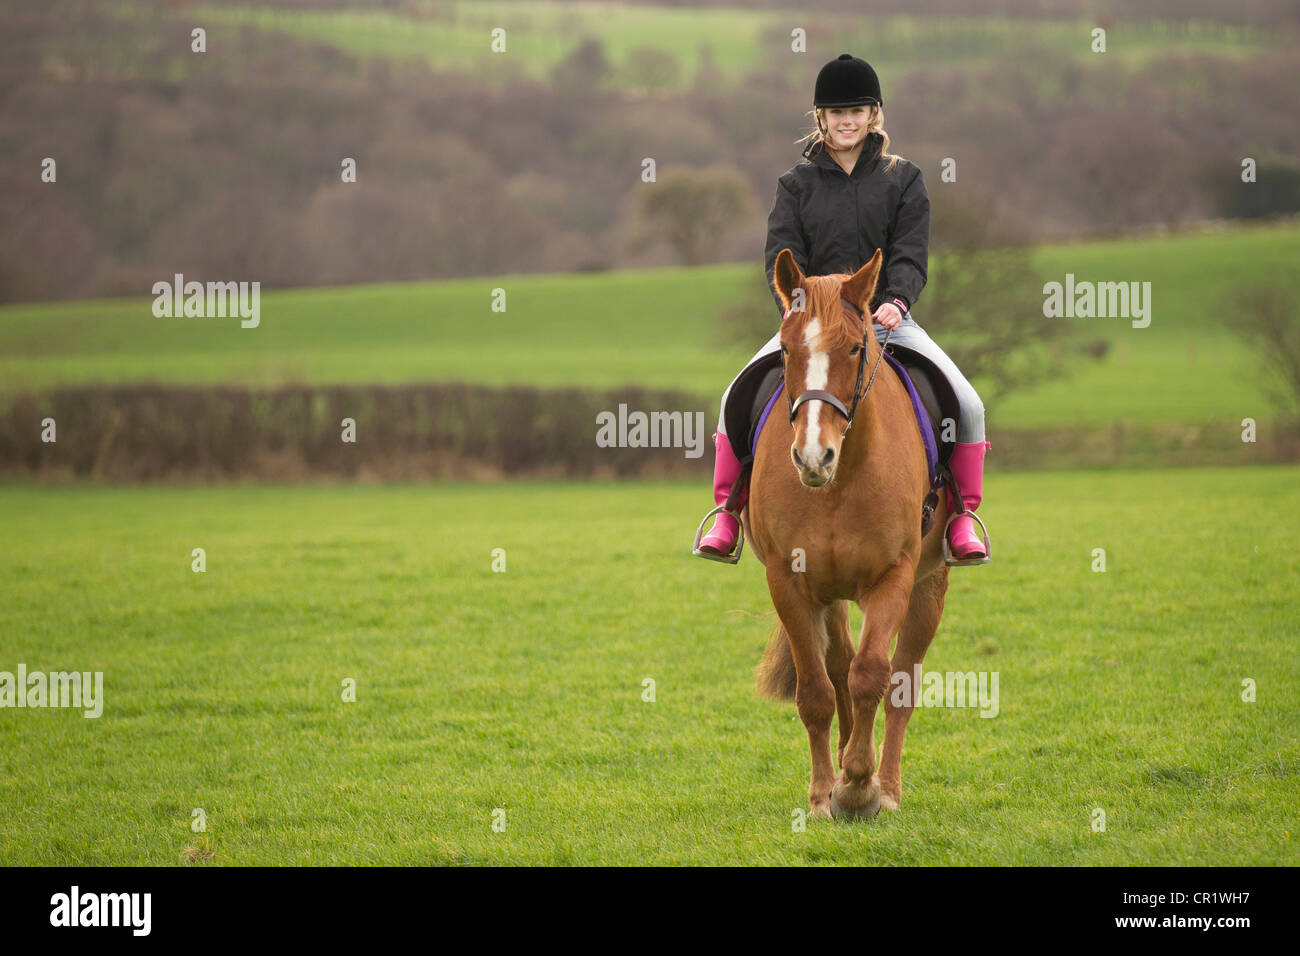 Teenage girl riding horse in field Stock Photo